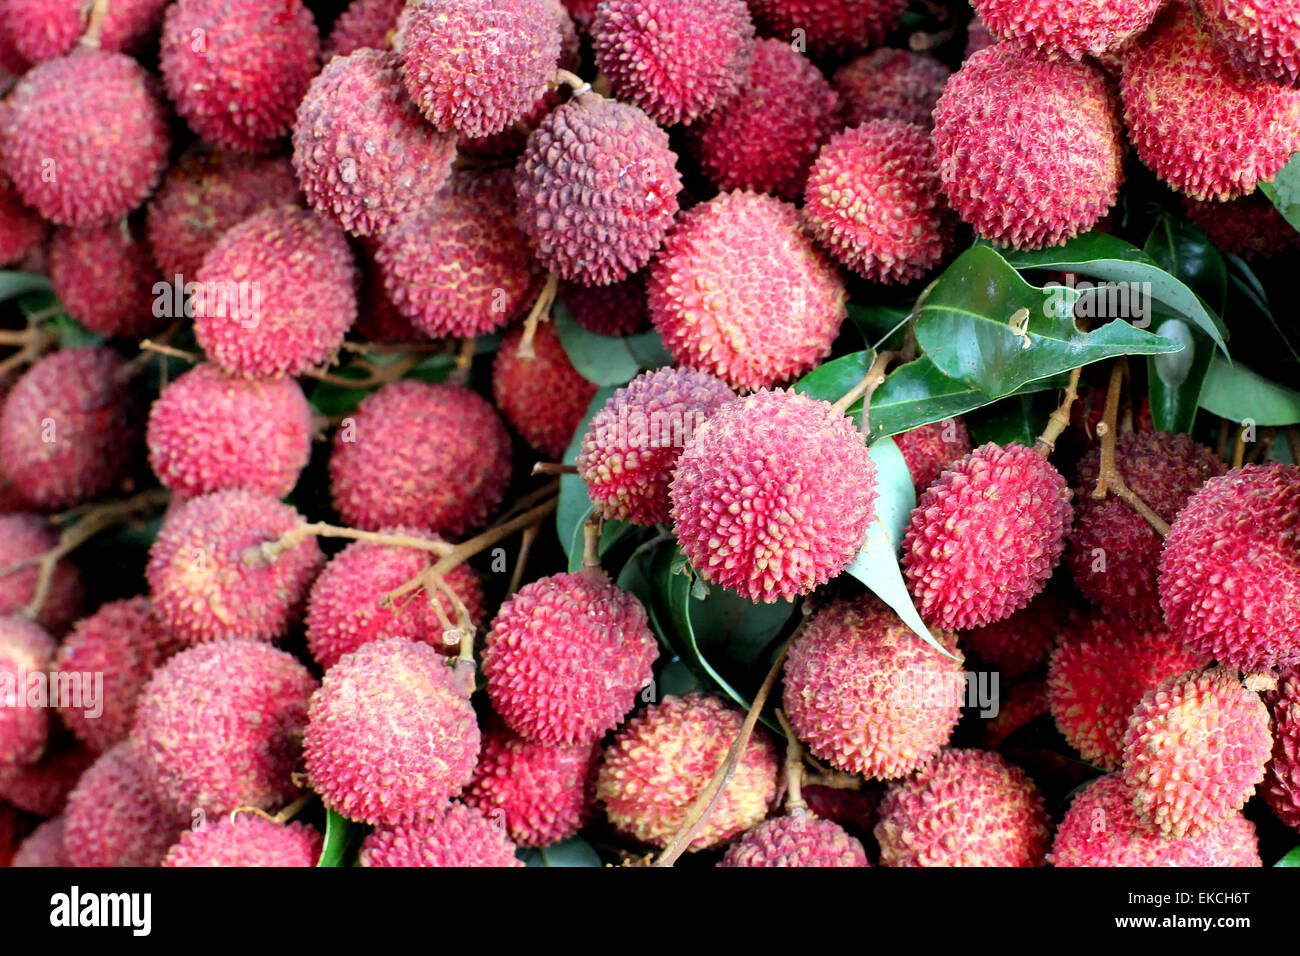 Lychee or litchi at fruit market Stock Photo